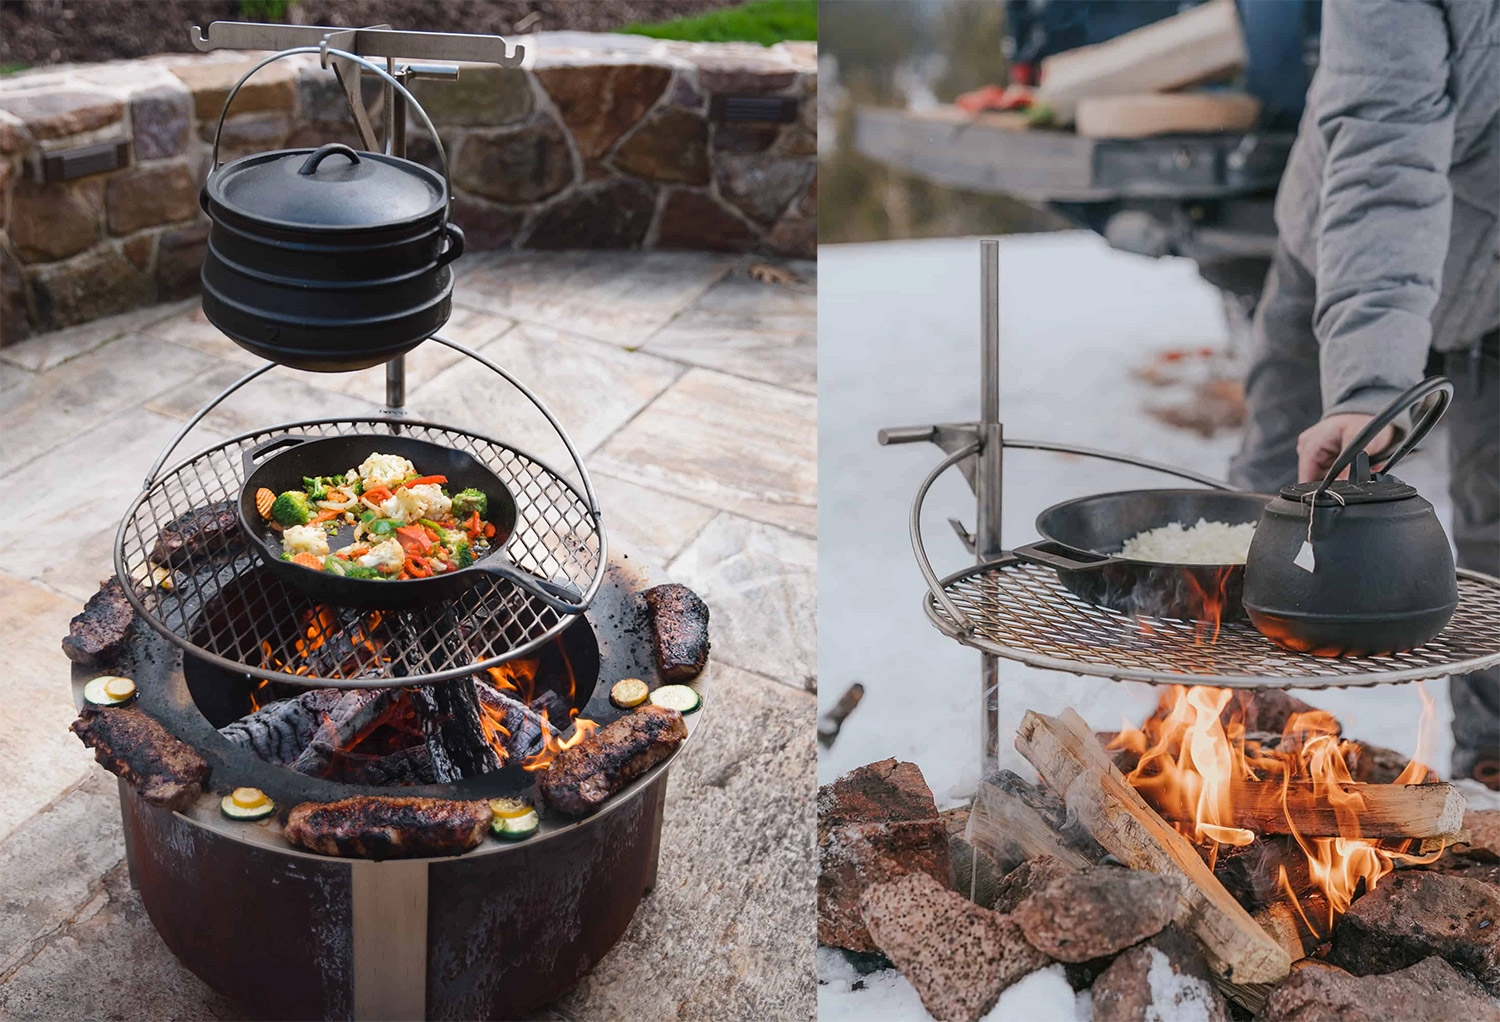  Ultimate Campfire Grill Turns Your Fire Pit Into a Tiered Cooking Machine - Breeo Fire pit cooker with winch